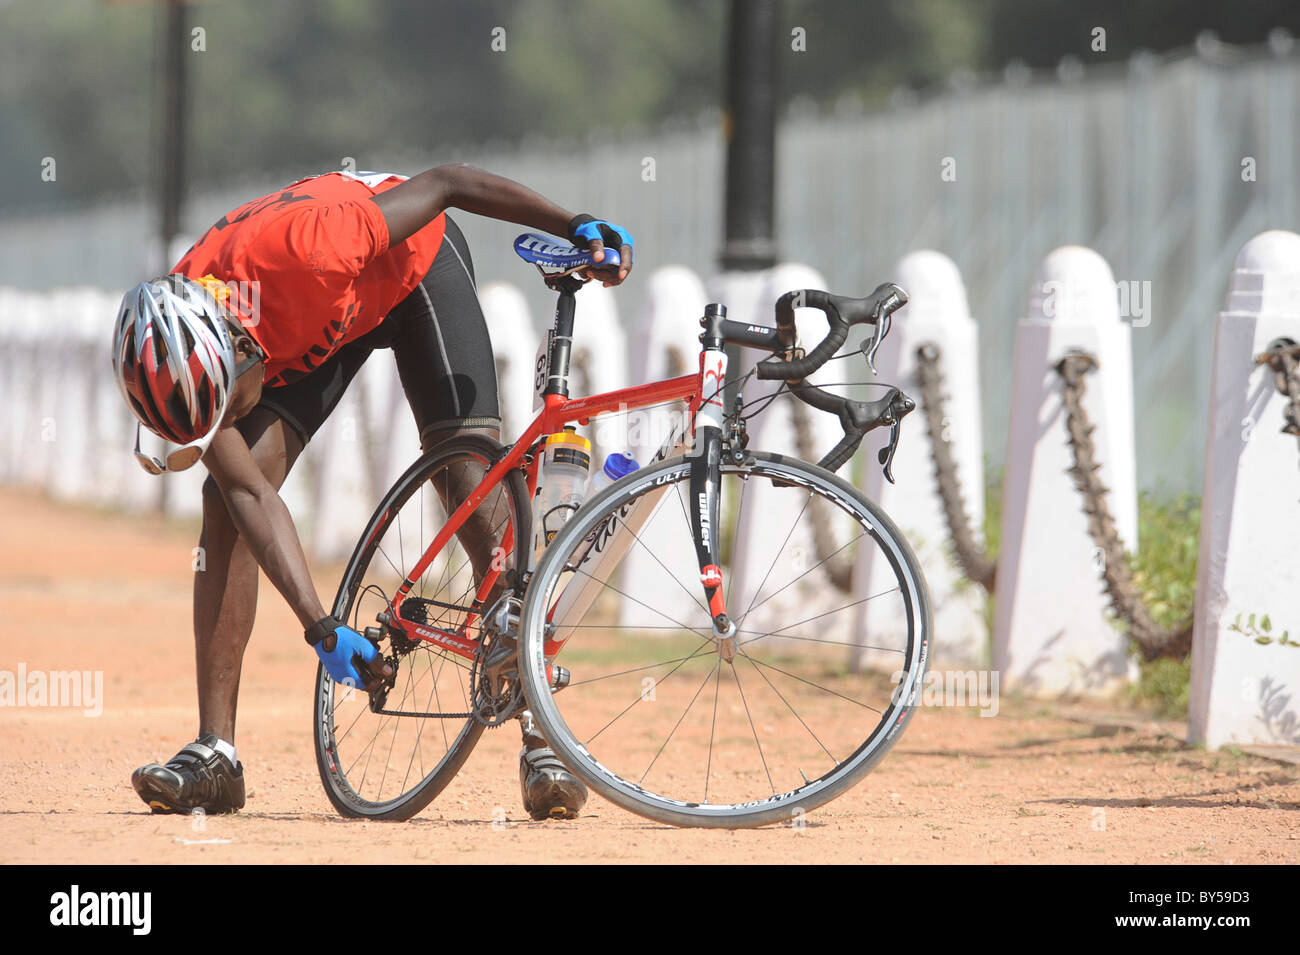 India Delhi 2010 XIX Commonwealth Games Road cycling event competitor  checking gears on his bike Stock Photo - Alamy